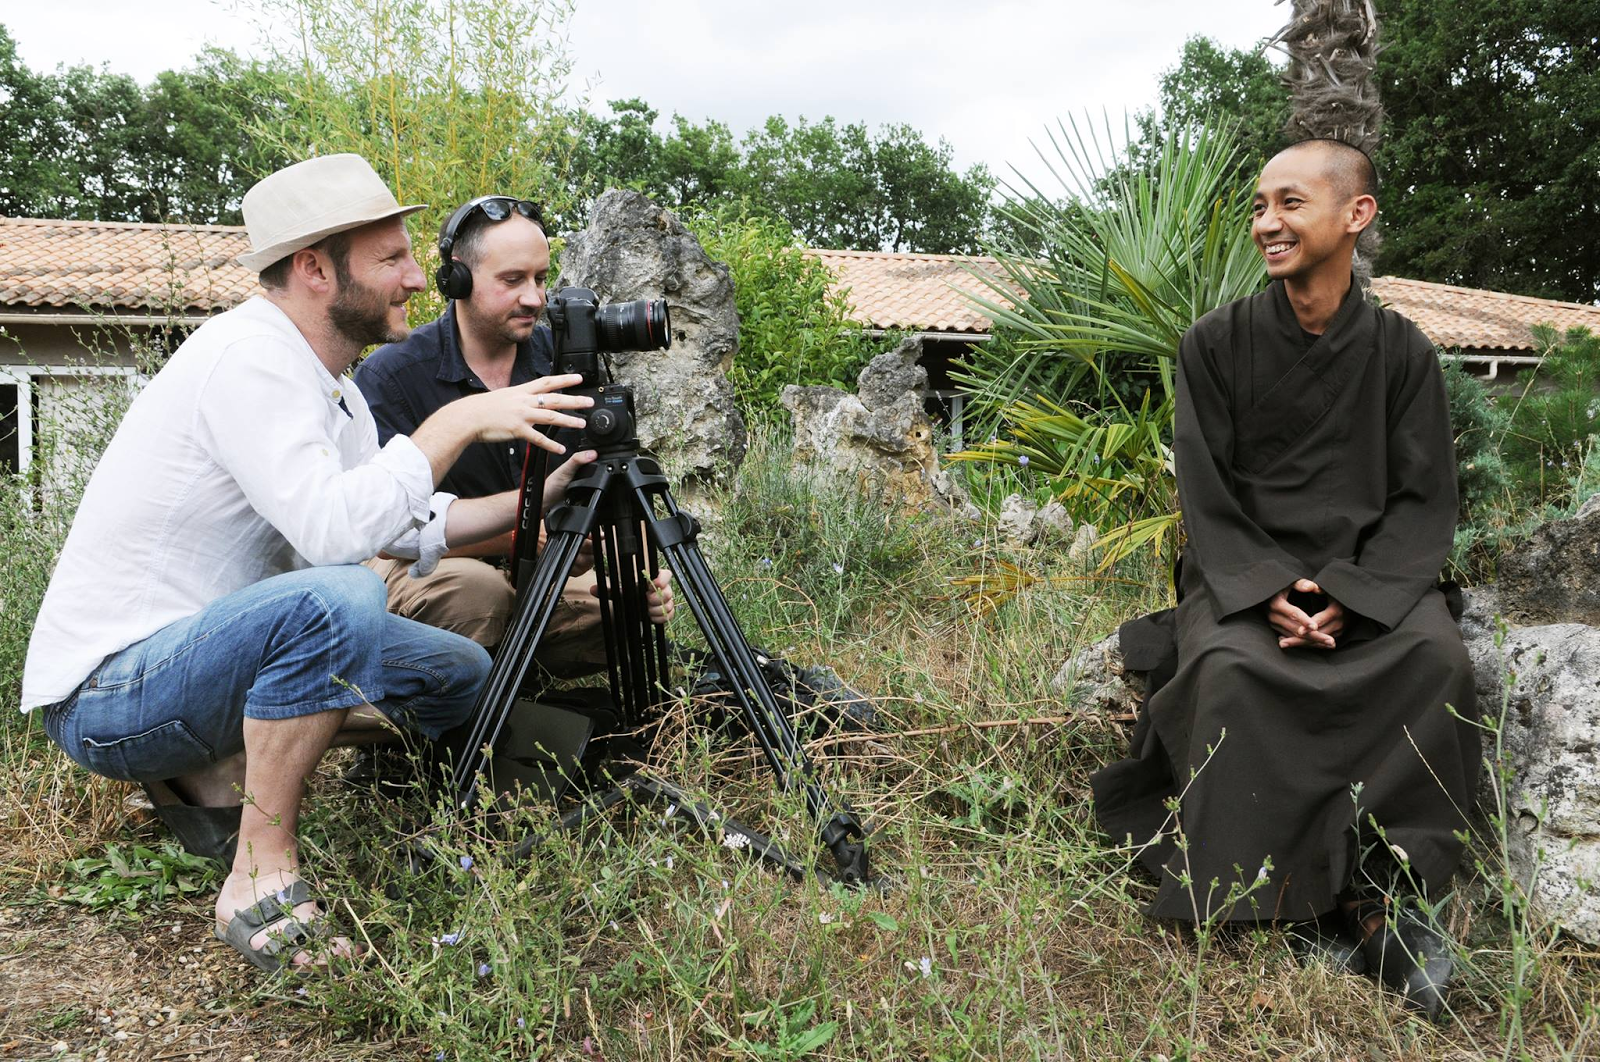 British directors Marc J. Francis and Max Pugh interview a monk at Plum Village Monastery in southern France. Photo: Facebook/Walk With Me